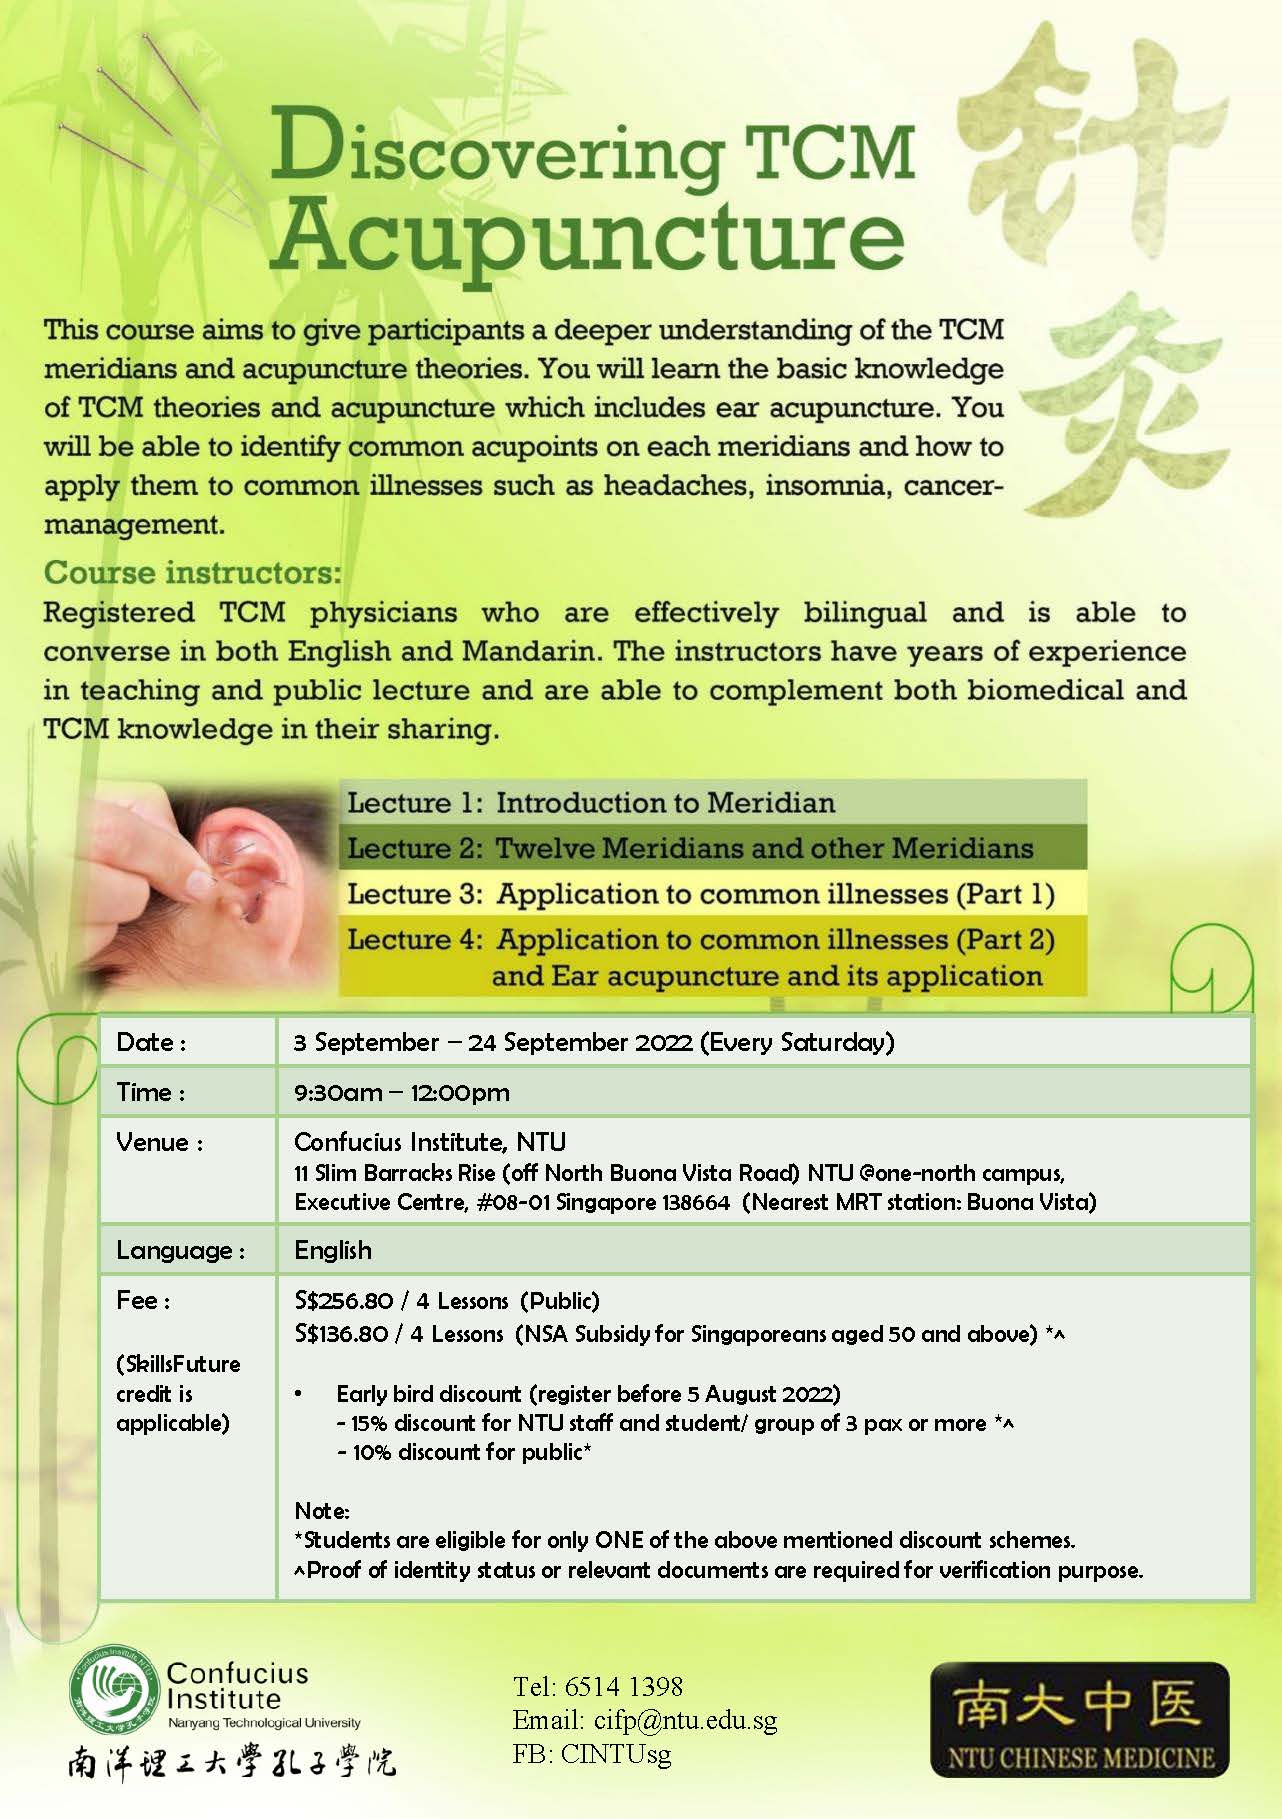 Discovering TCM Acupuncture 2022